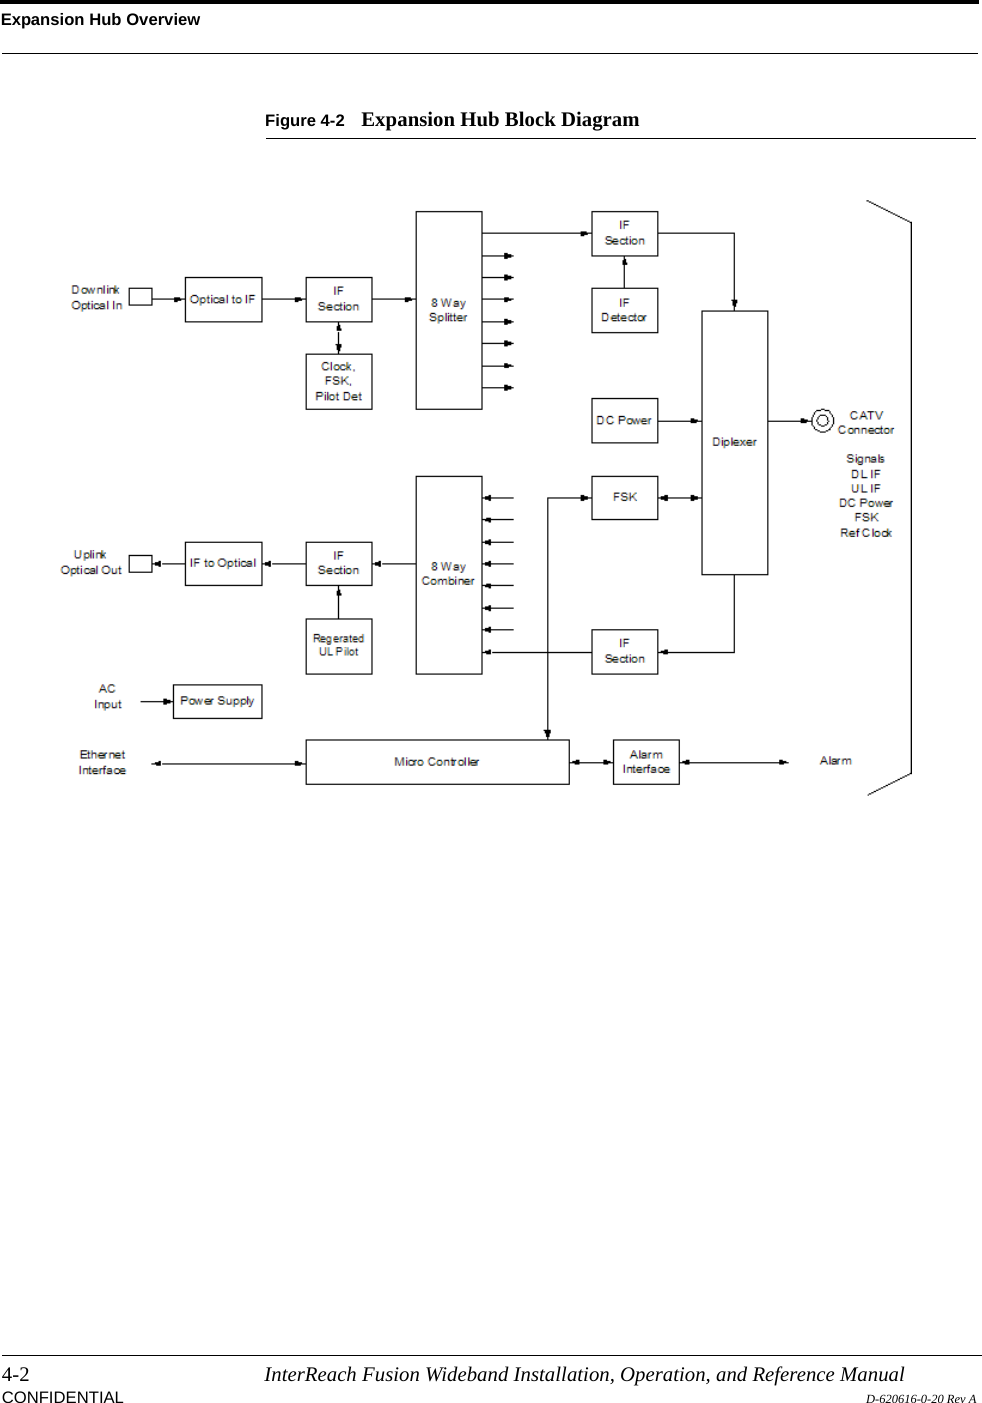 Expansion Hub Overview4-2 InterReach Fusion Wideband Installation, Operation, and Reference ManualCONFIDENTIAL D-620616-0-20 Rev AFigure 4-2 Expansion Hub Block Diagram